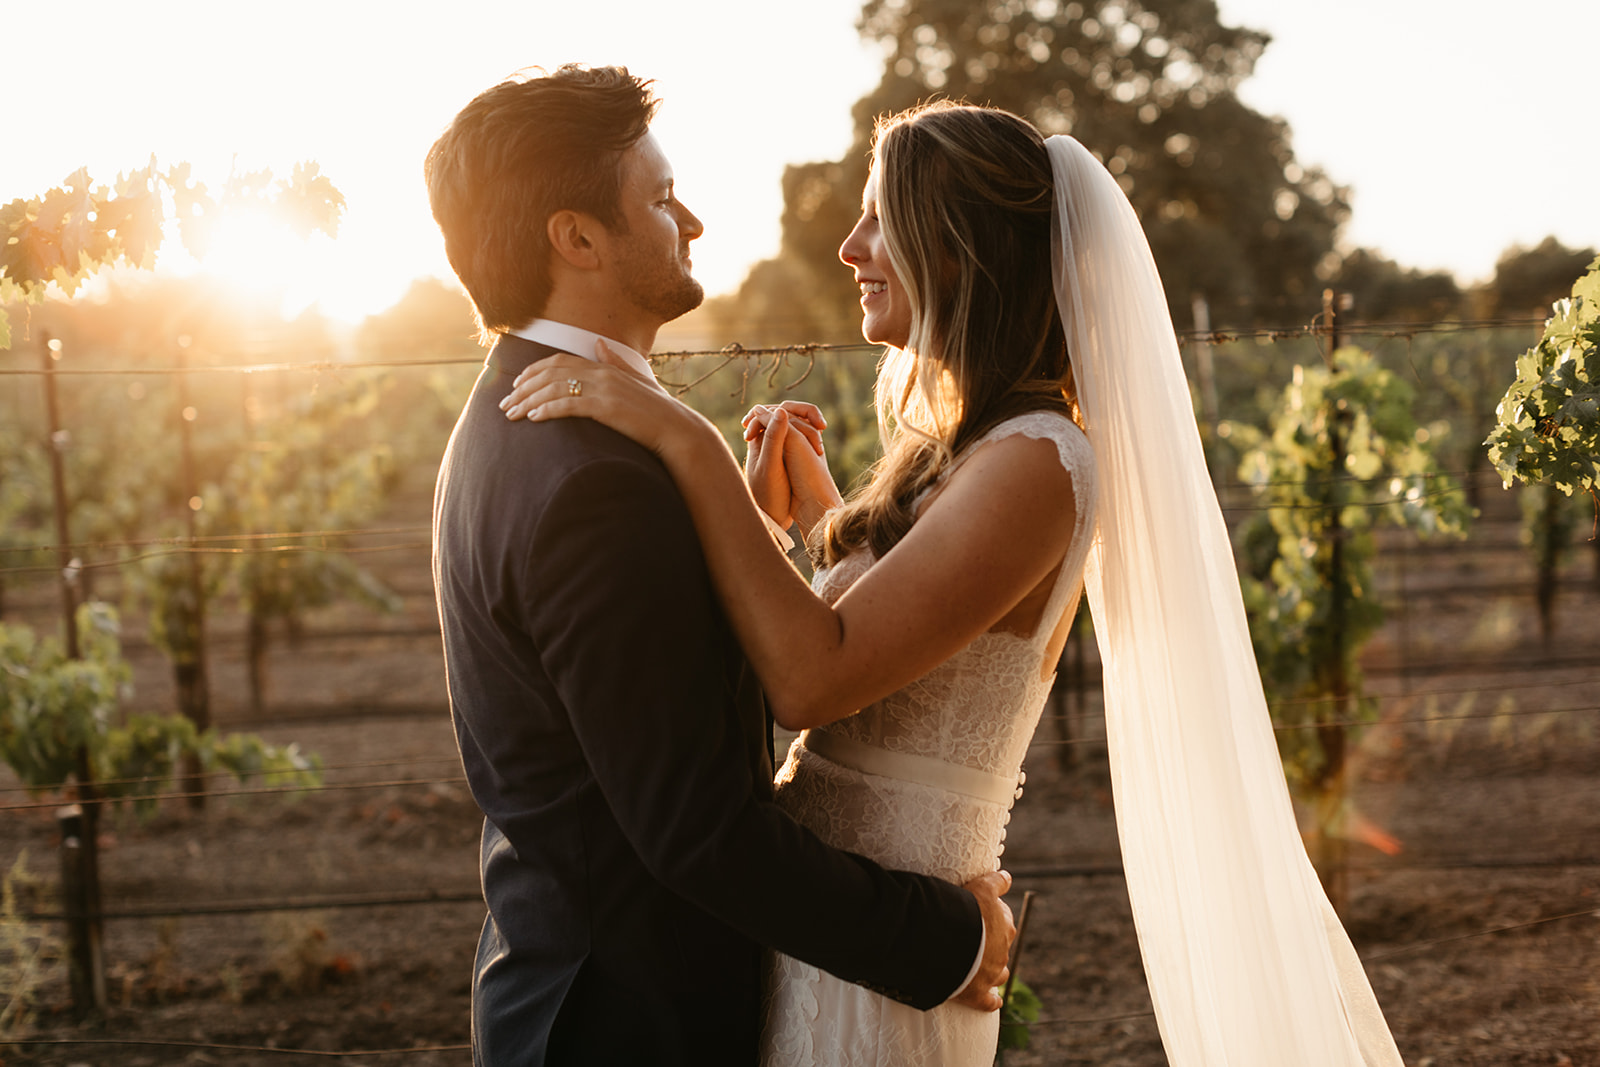 bride in lace dress and groom in dark blue suit take sunset portrait shots in vineyard at Roblar Winery